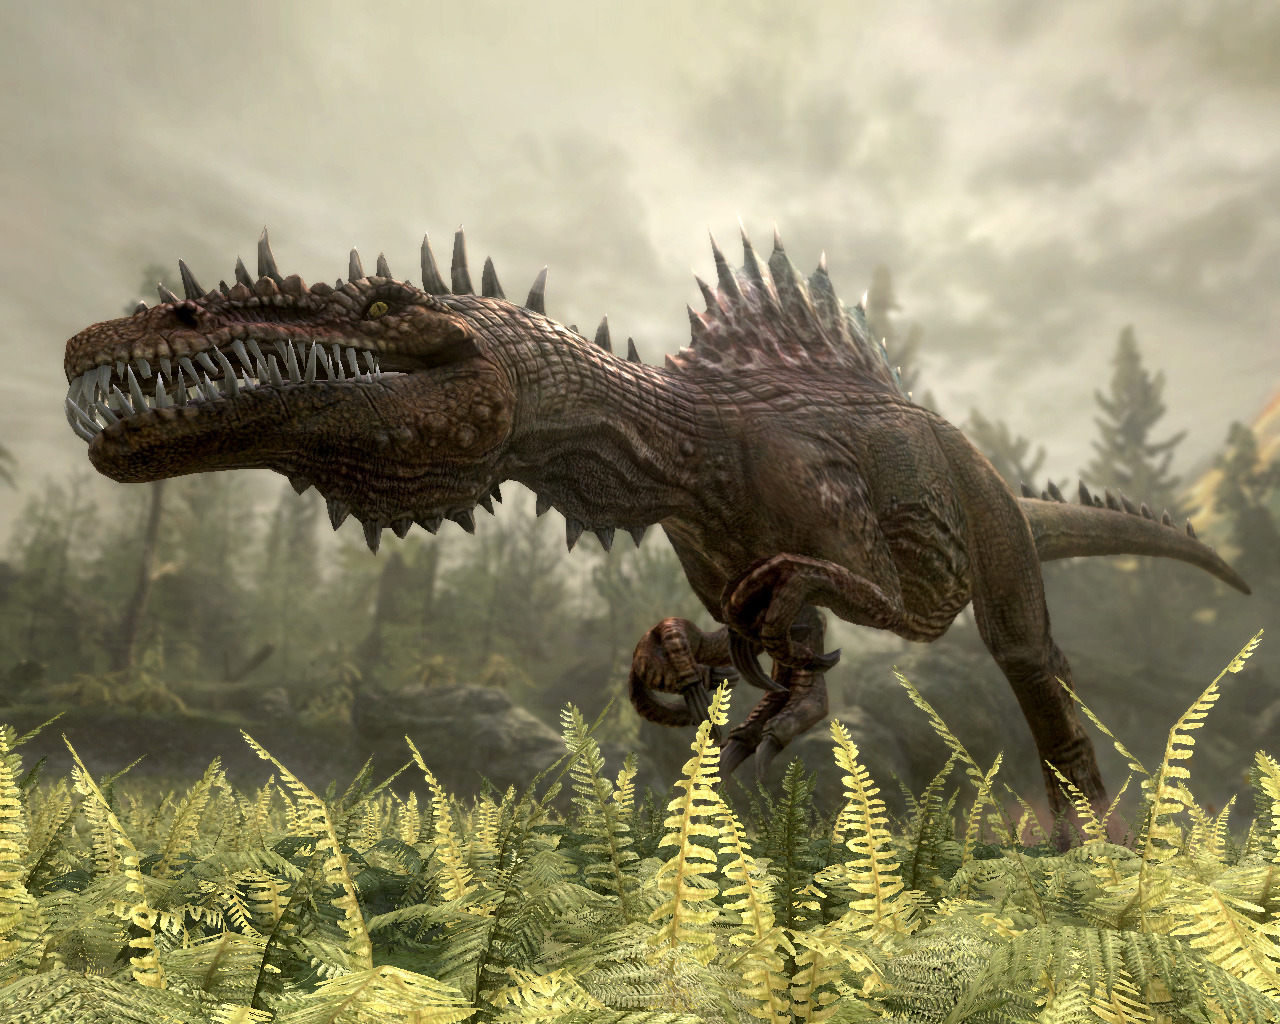 http://www.jeuxvideo.com/images/p3/j/u/jurassic-the-hunted-playstation-3-ps3-001.jpg